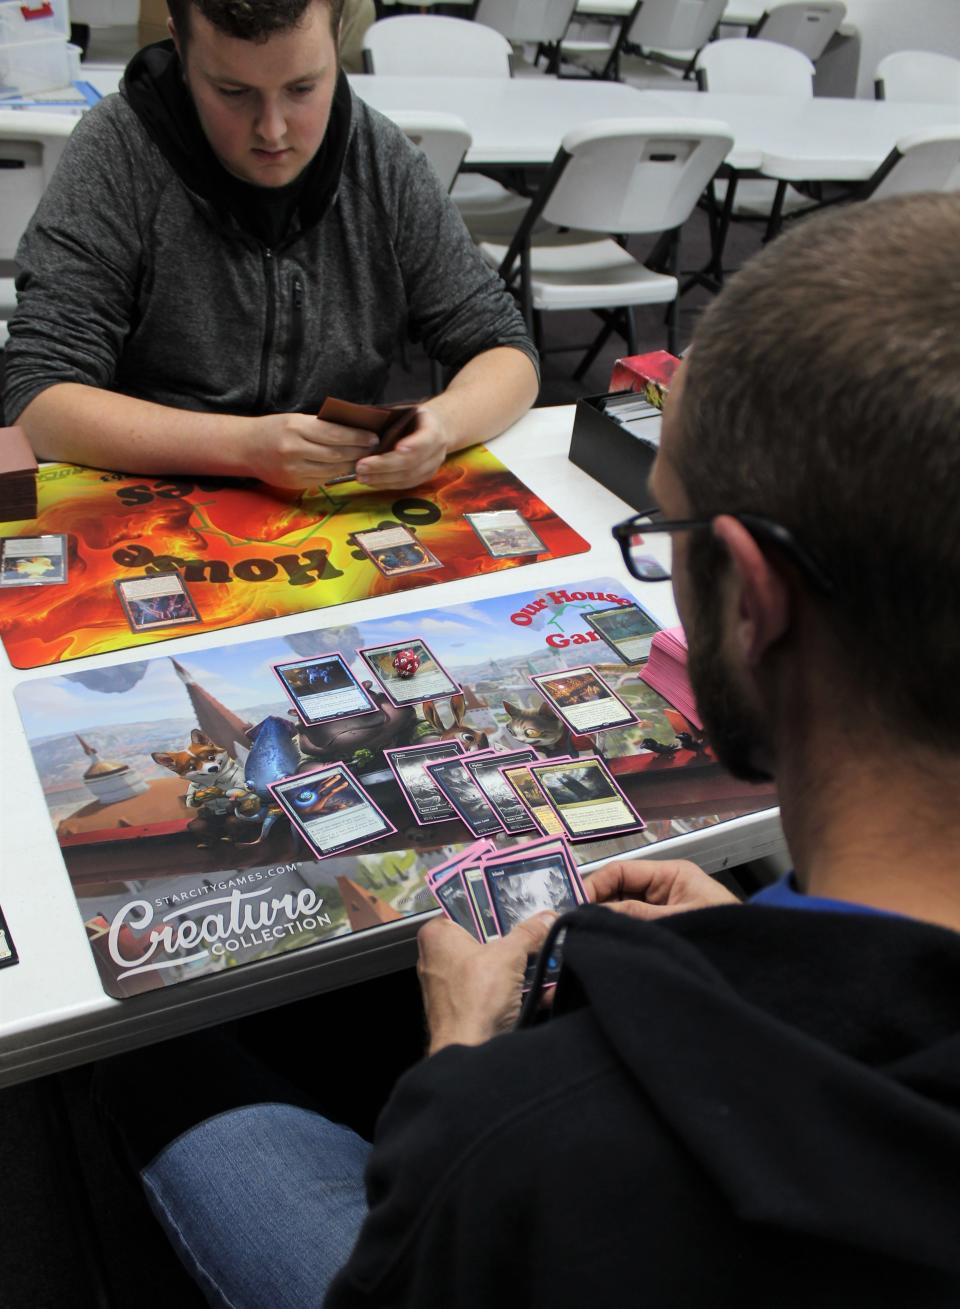 It’s game night for Monroe residents Ian Koebel (left) and Nick West as they play the card game, Magic: The Gathering.